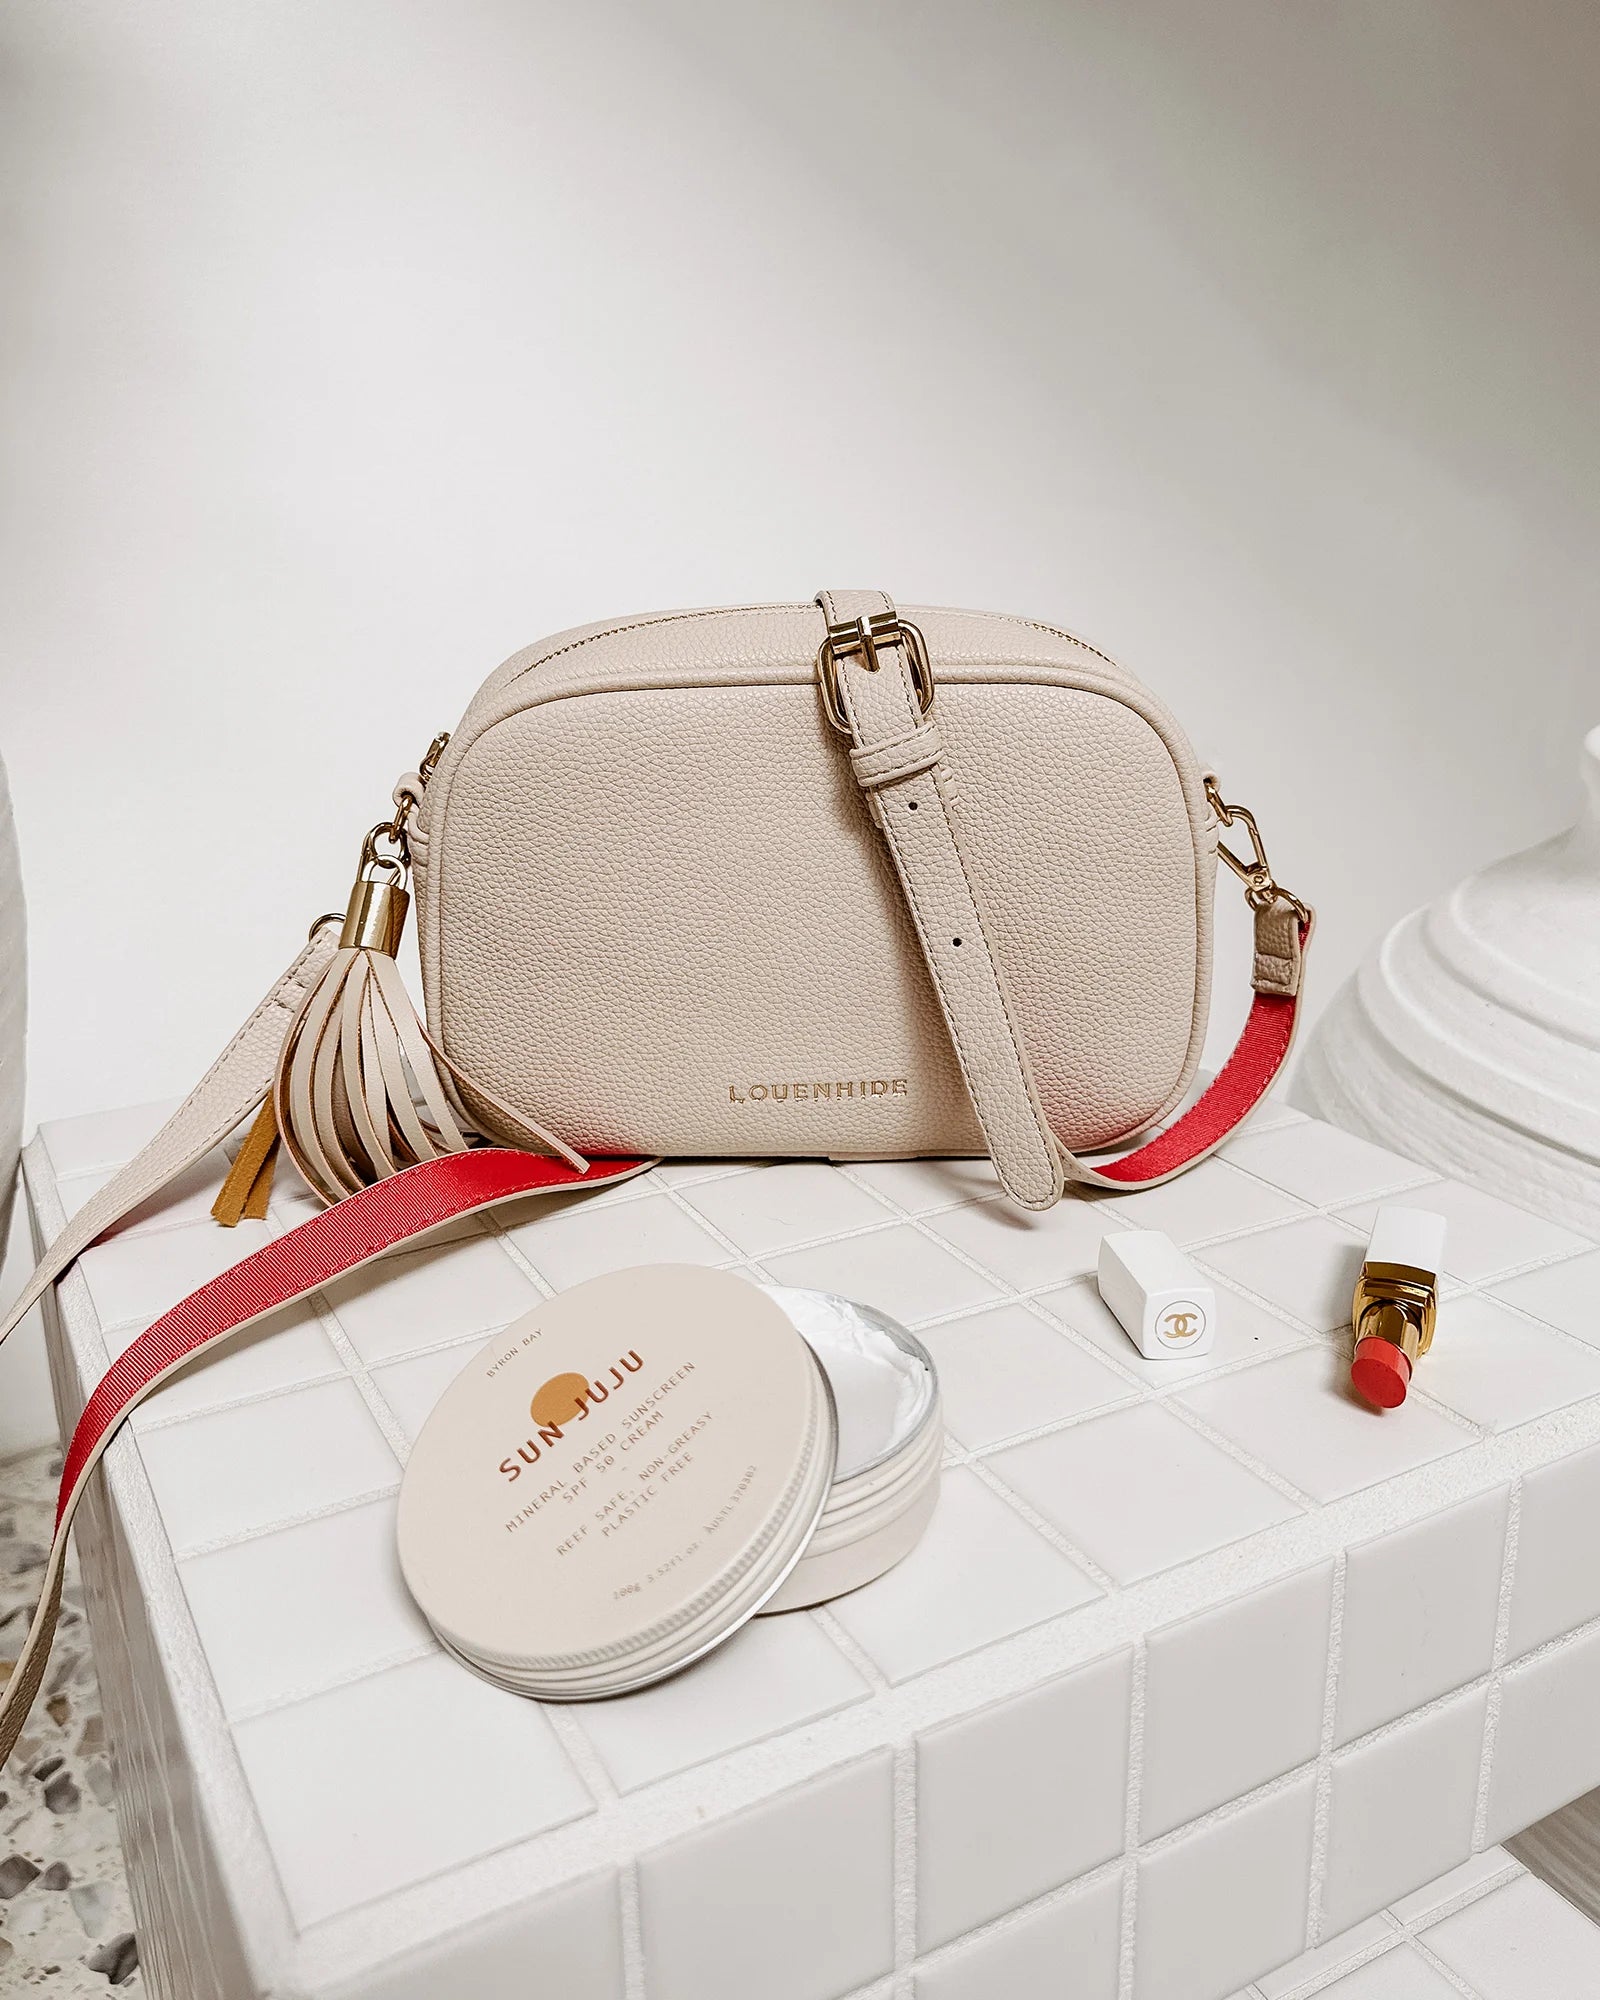 The Louenhide Jacinta Crossbody Bag is the ultimate cool-girl bag, featuring a complimentary detachable guitar strap.